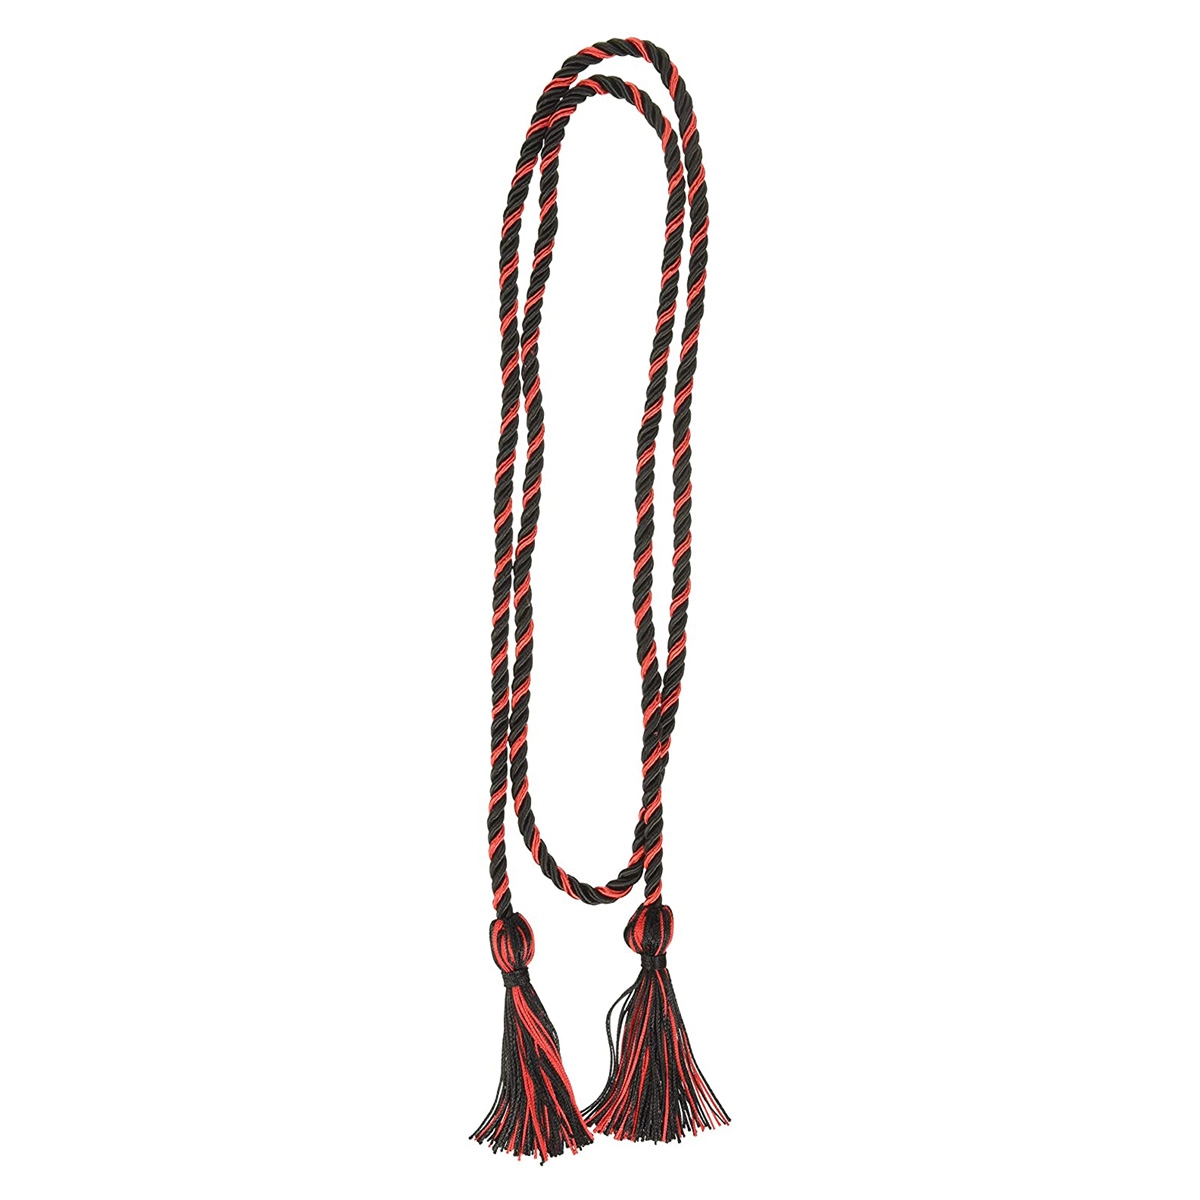 Graduation Mall Graduation Honor Cords 68   red and black color